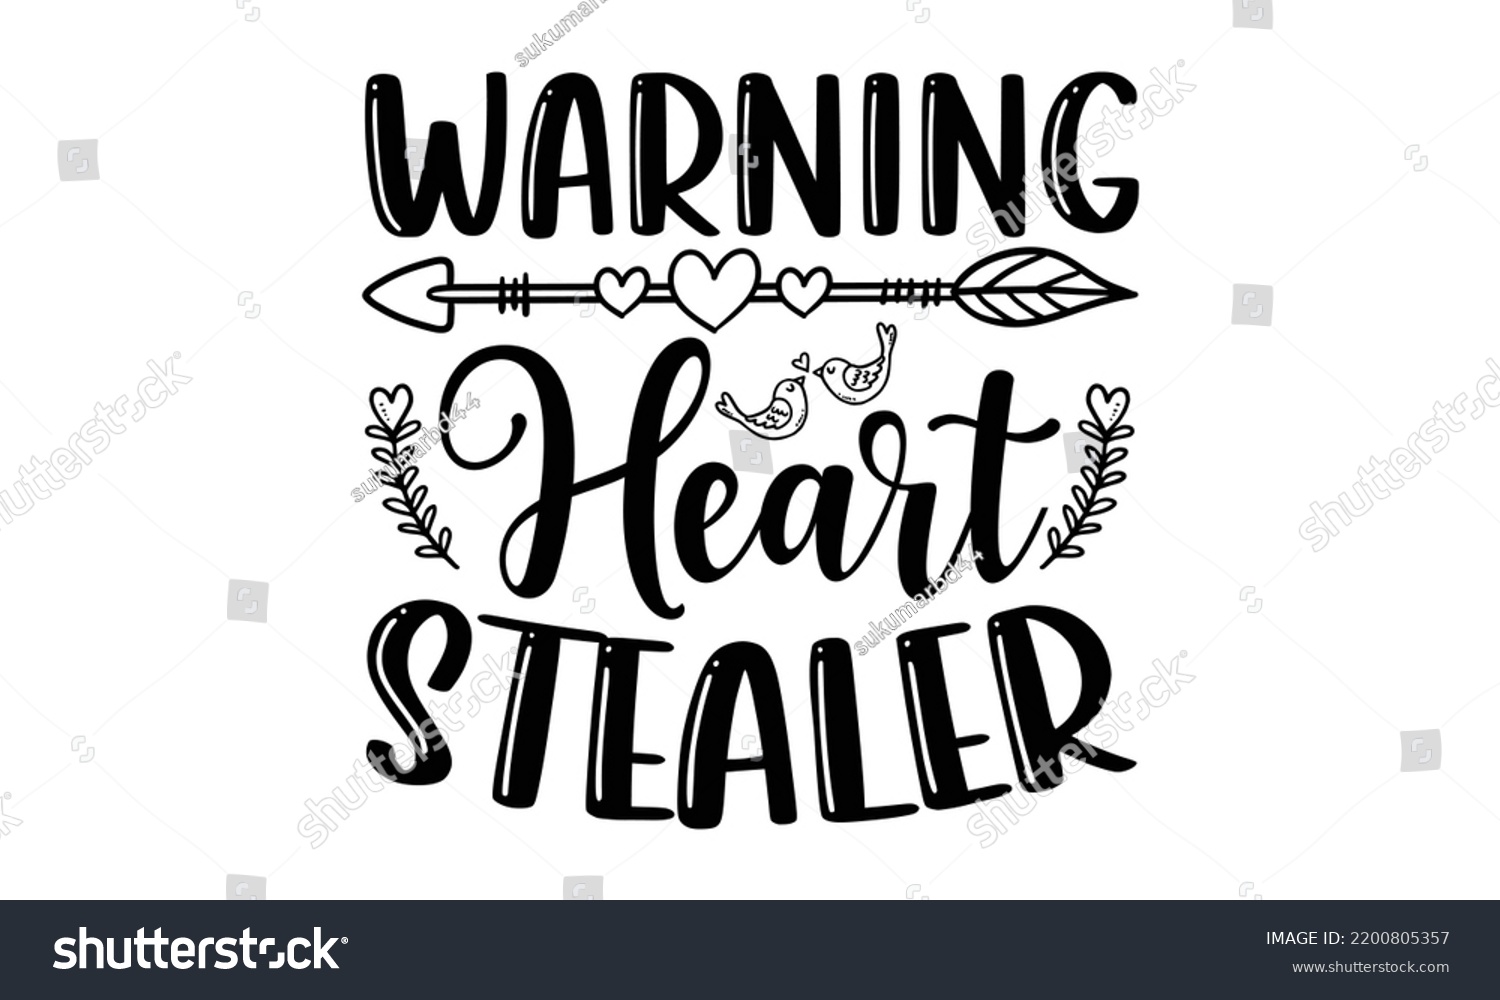 SVG of Warning Heart Stealer - Valentine's Day t shirt design, Hand drawn lettering phrase, calligraphy vector illustration, eps, svg isolated Files for Cutting svg